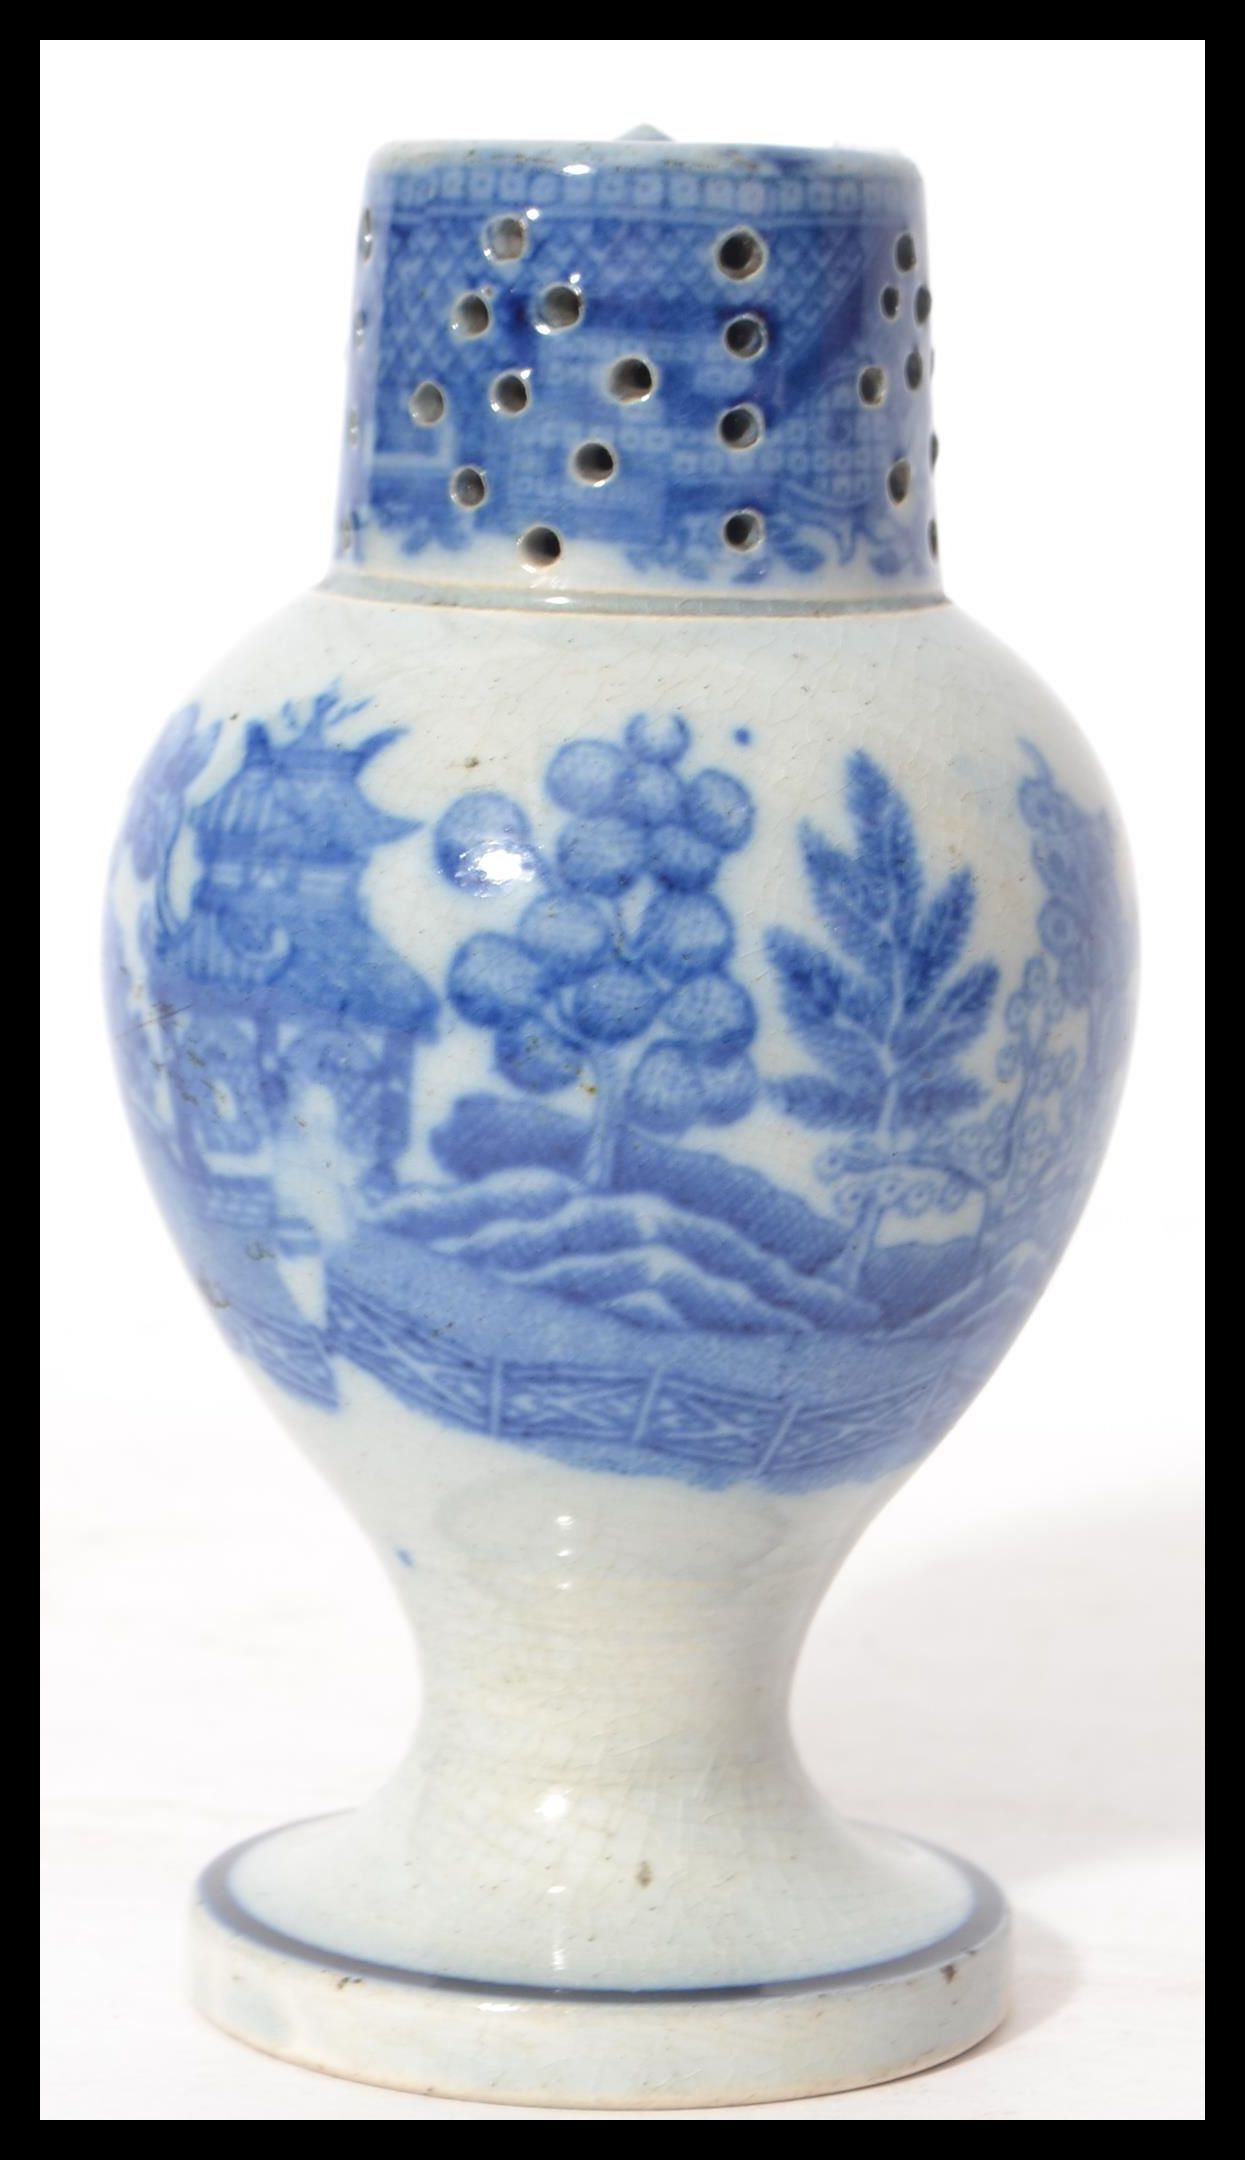 A 19th century blue and white ceramic sander pounce pot having a circular vase with bulbous body and - Image 3 of 6